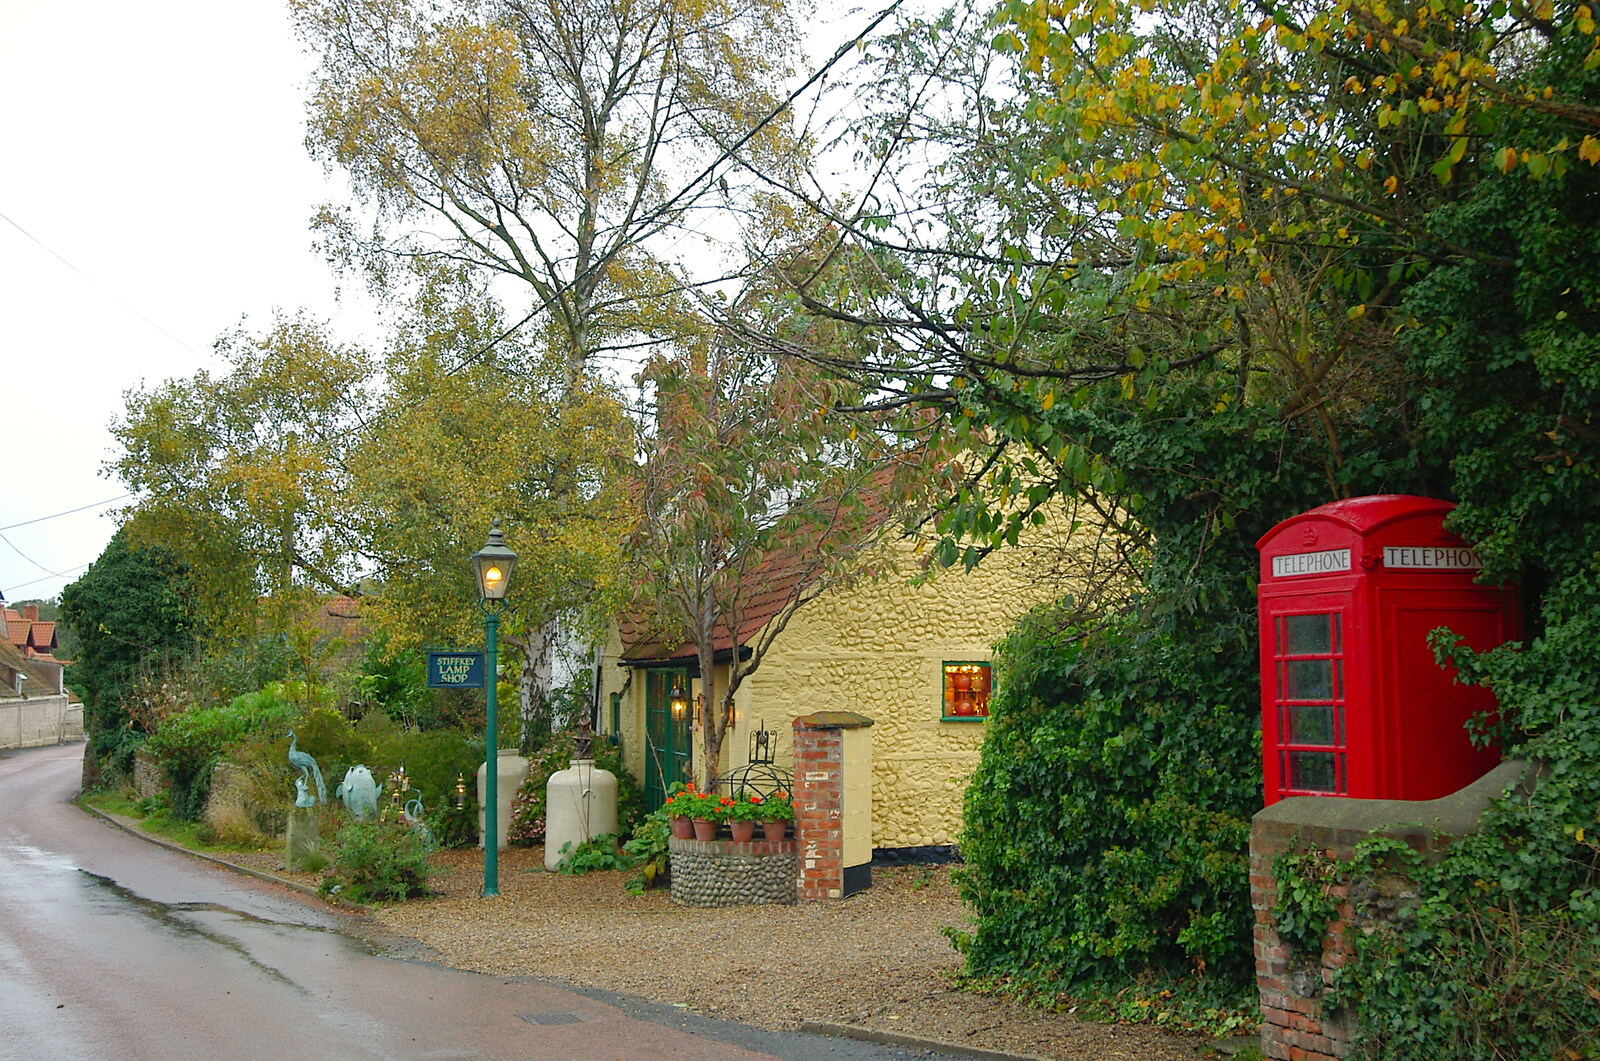 A K6 phone box in Stiffkey from Mother, Mike and the Stiffkey Light Shop, Cley and Holkham - 6th November 2005